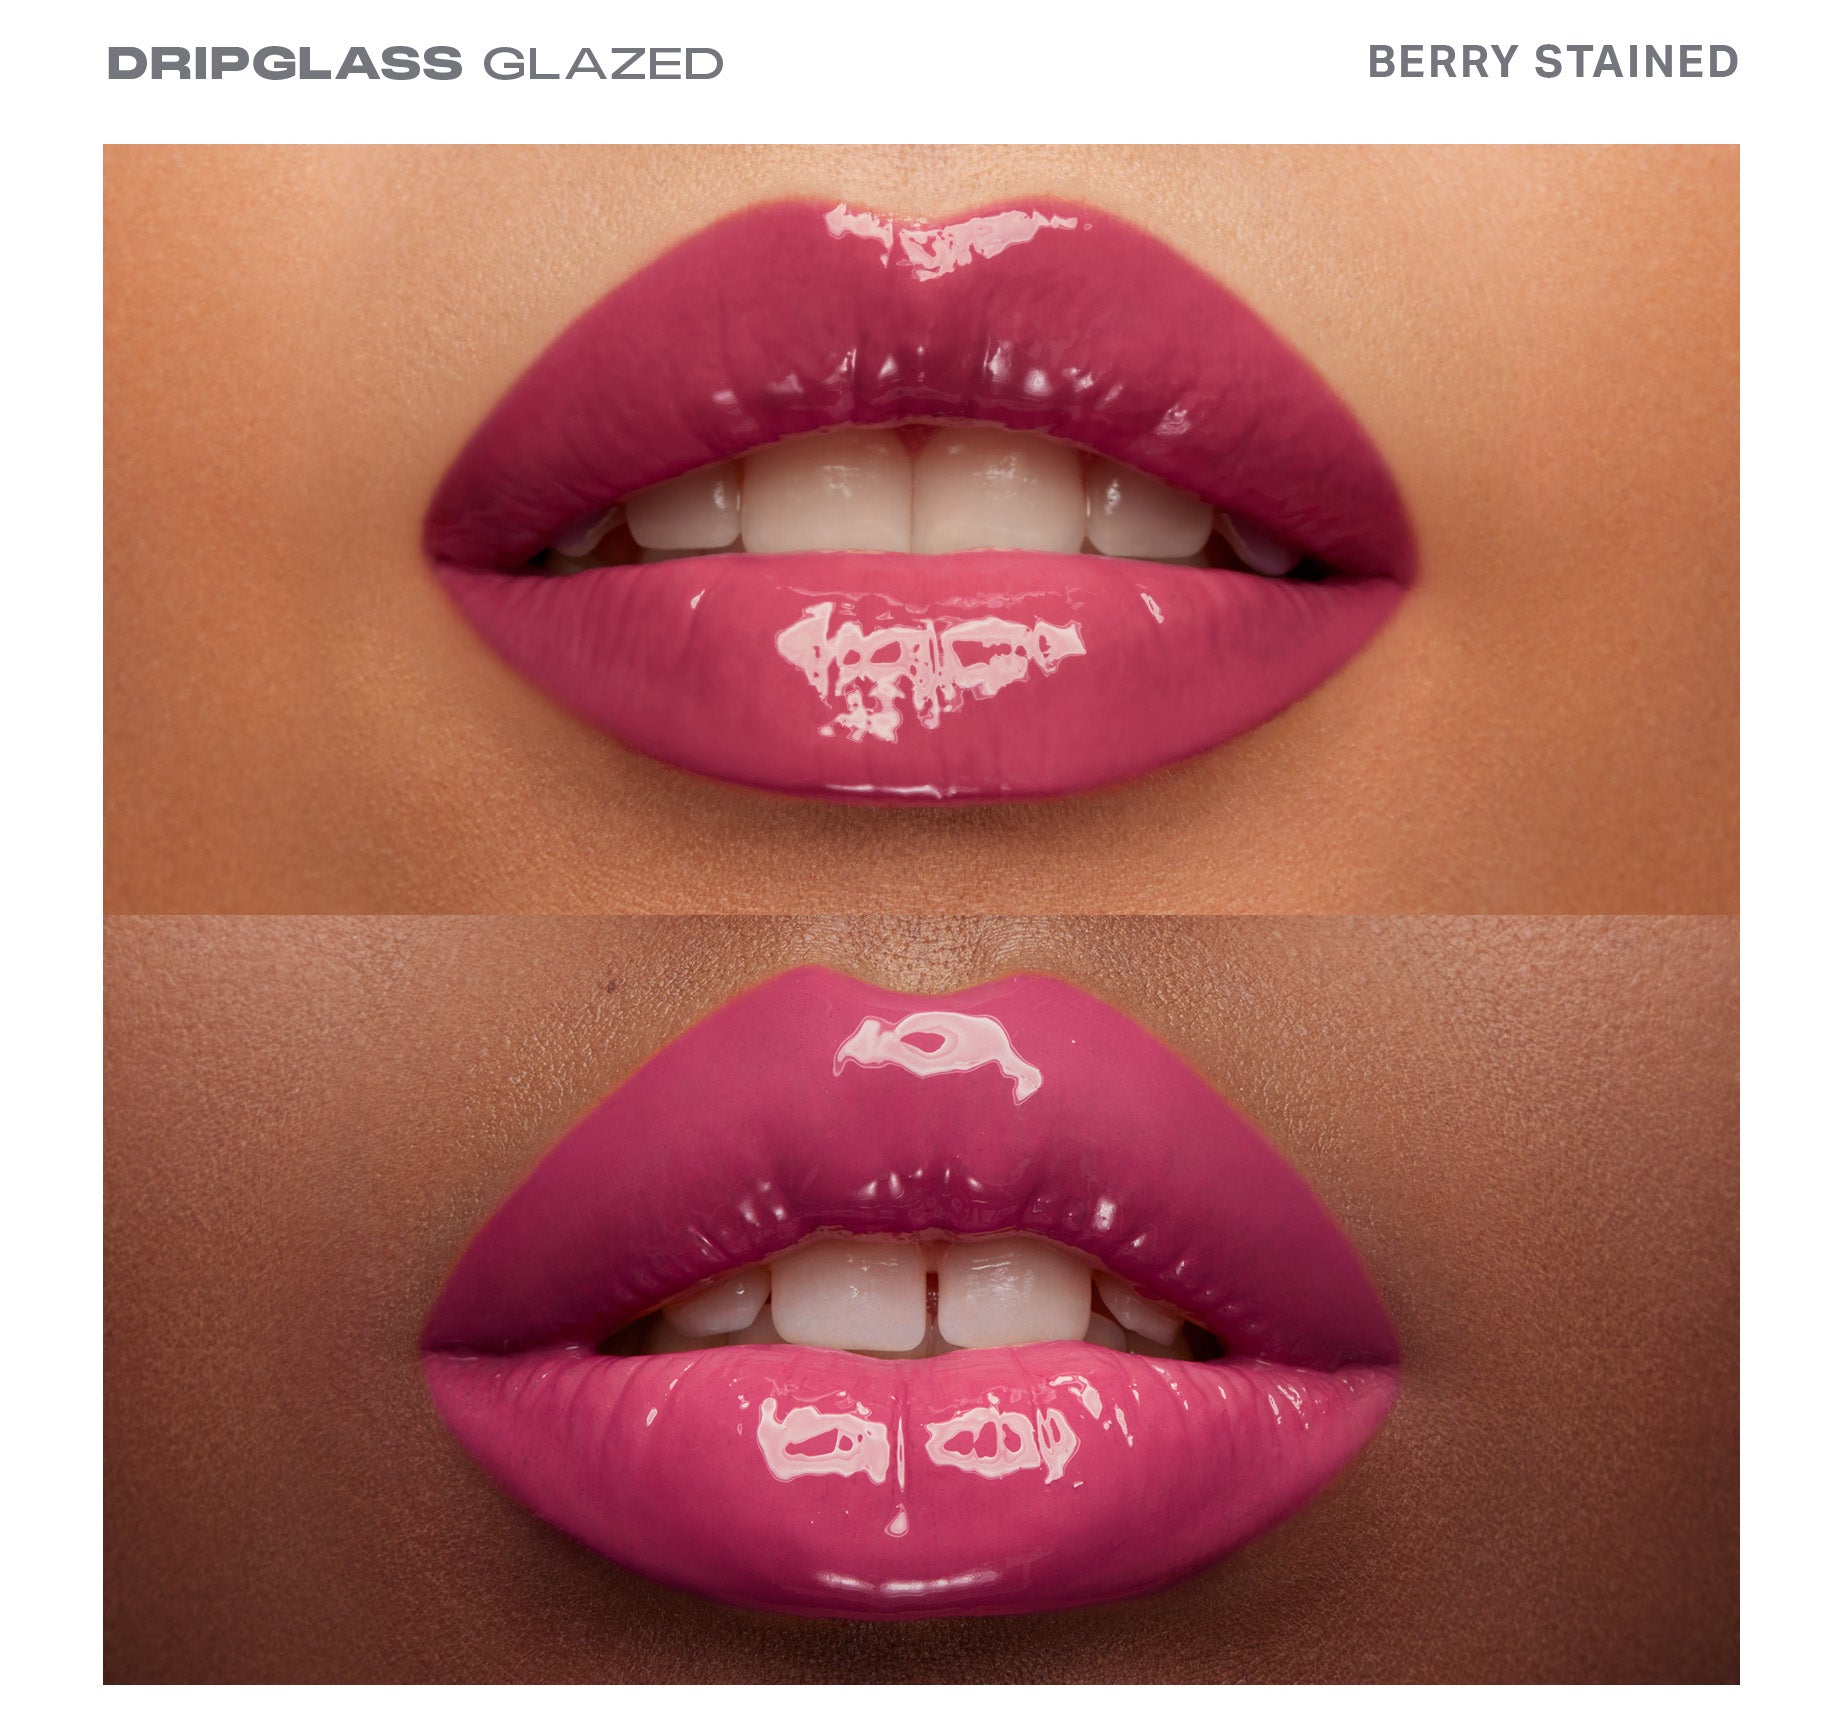 Dripglass Glazed High Shine Lip Gloss - Berry Stained - Image 3